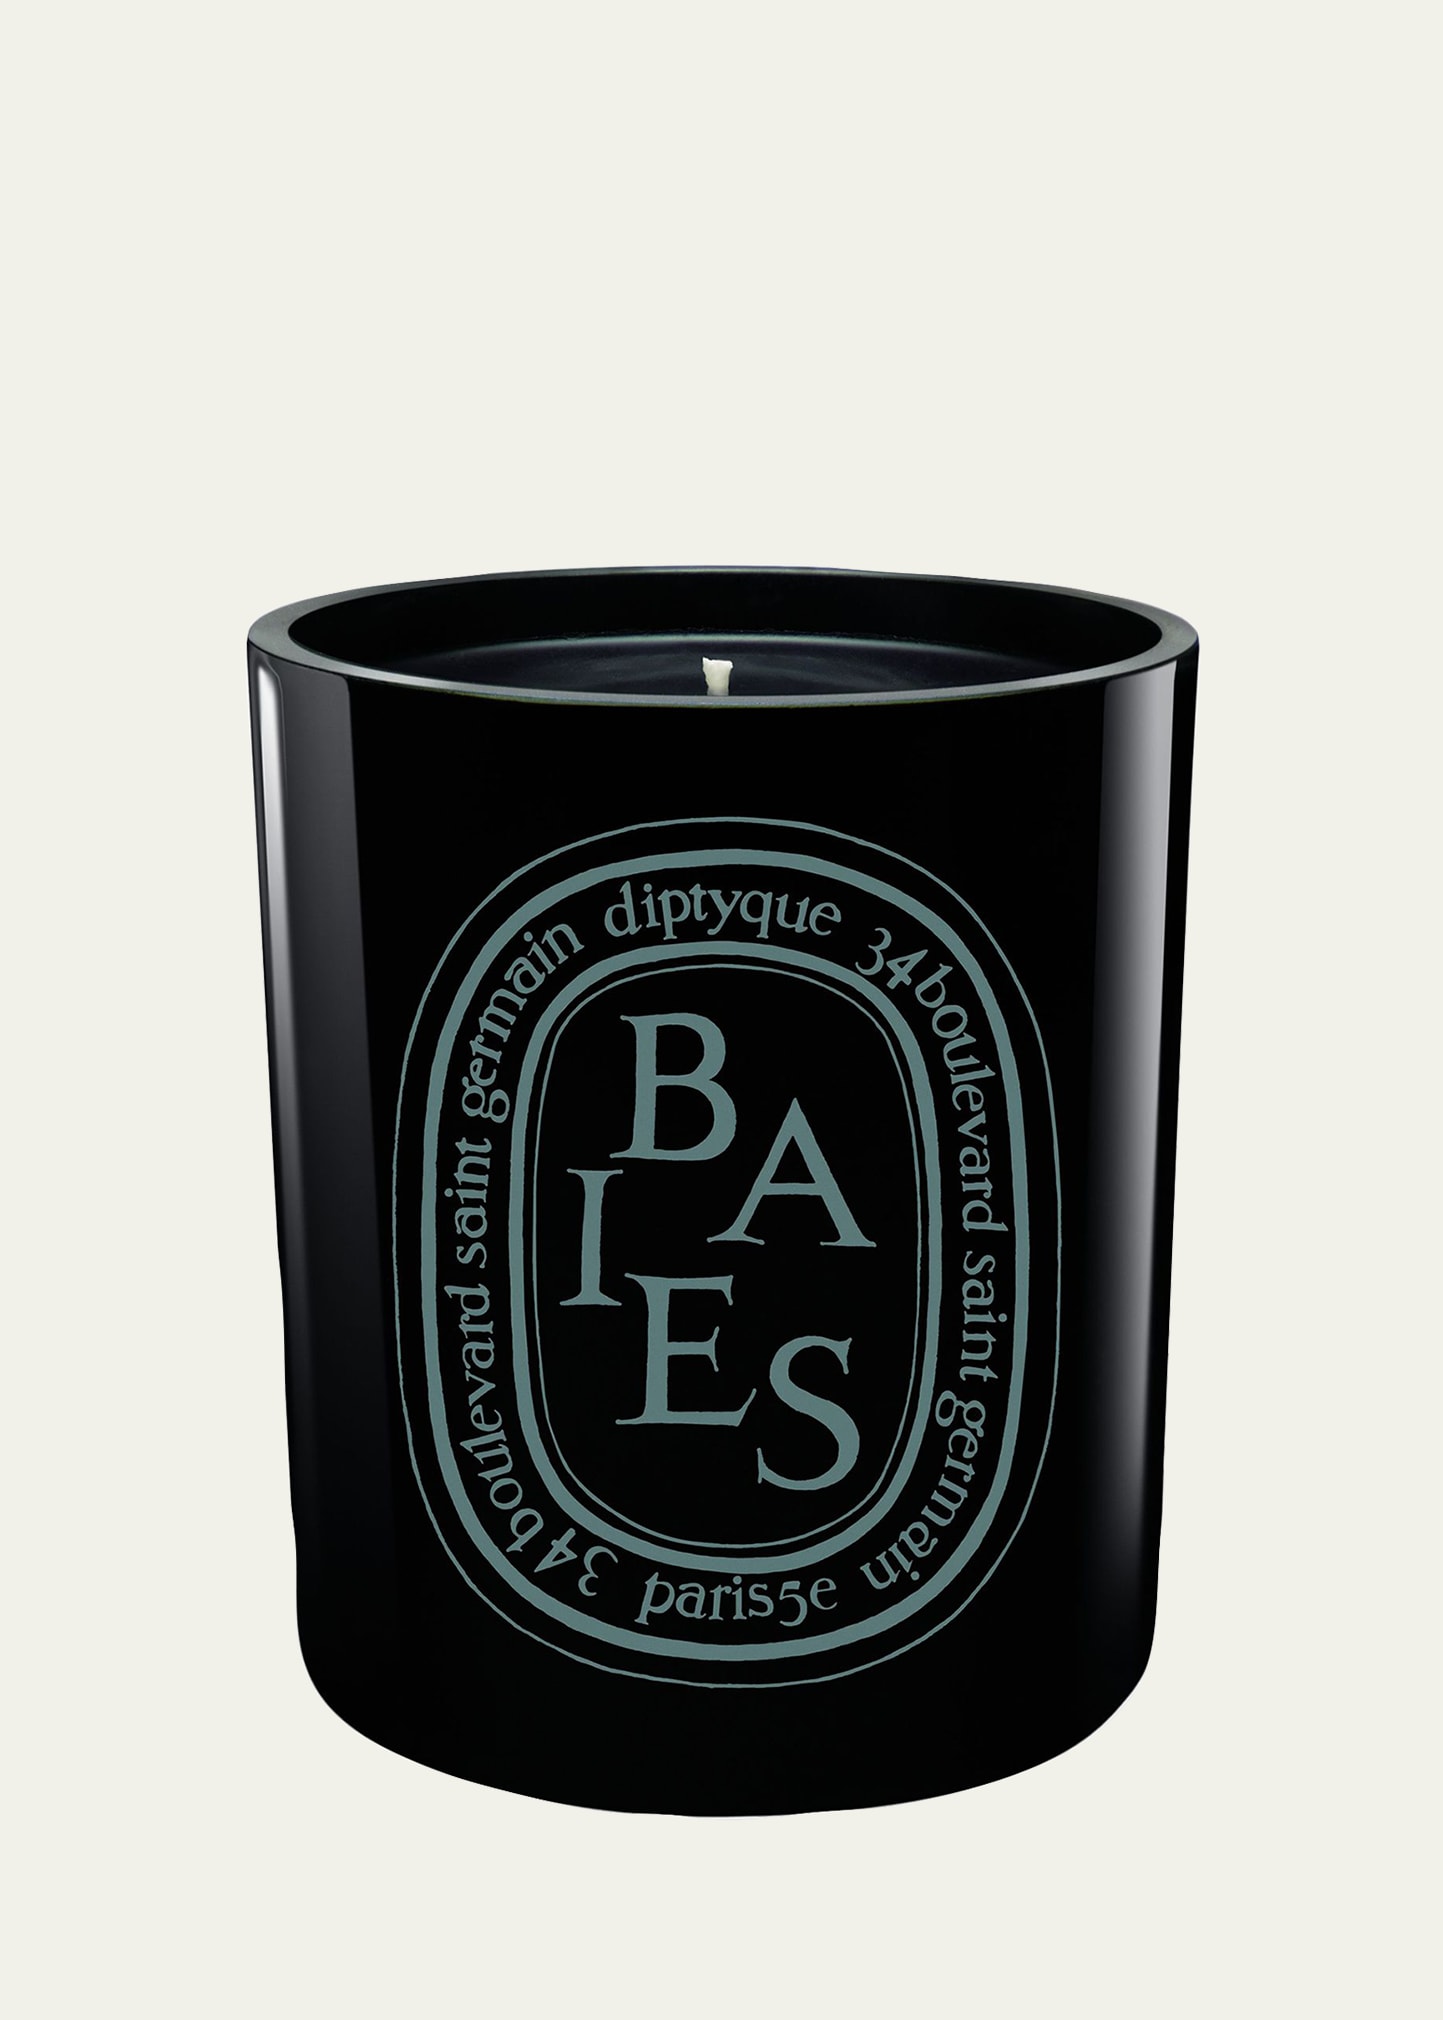 Diptyque Baies (berries) Scented Candle, 10.2 Oz.